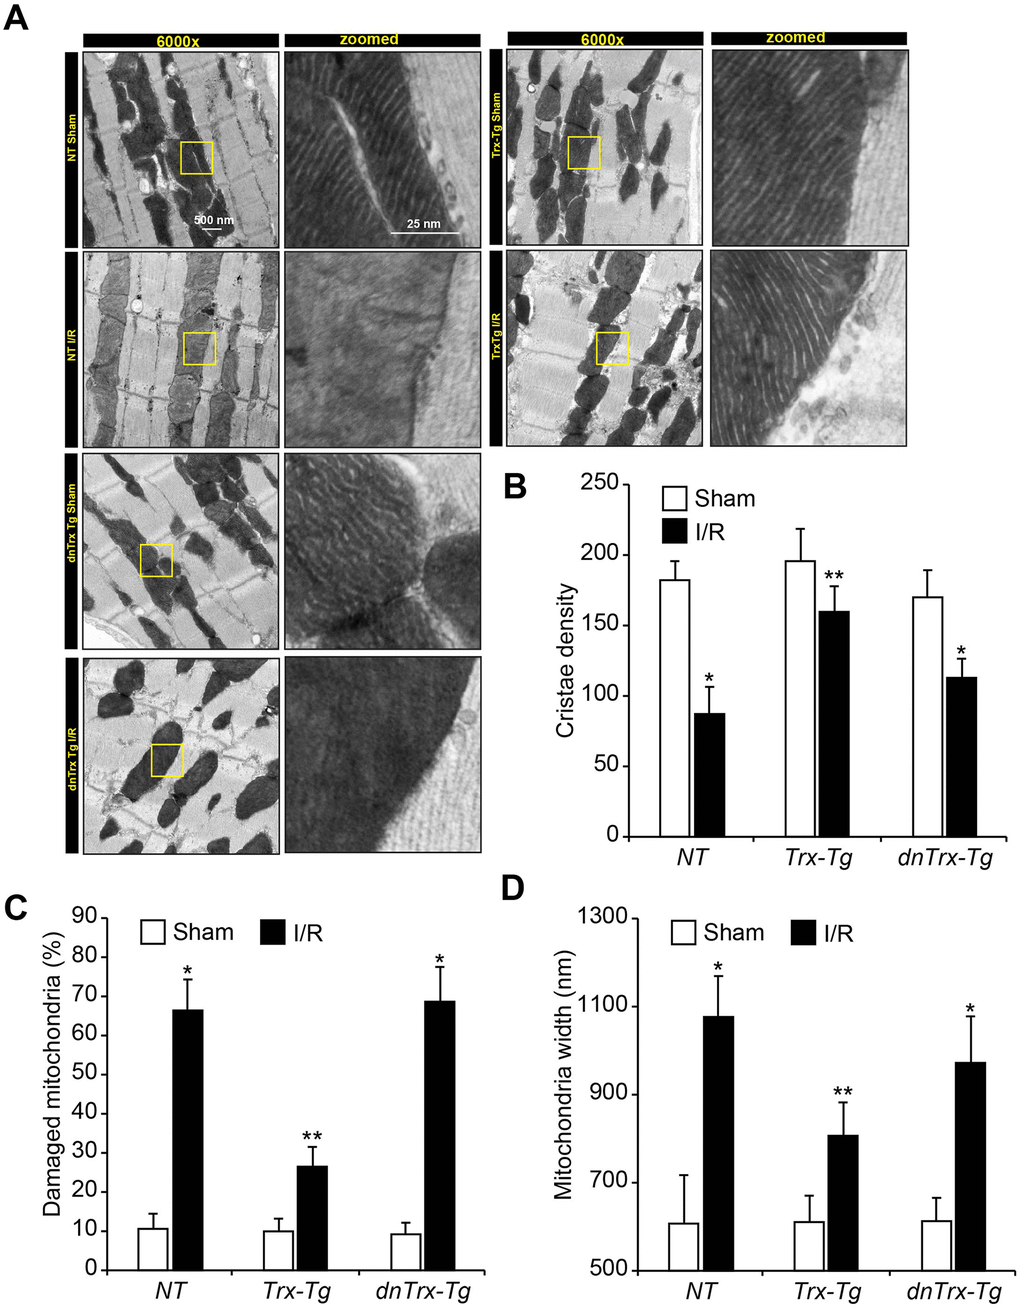 High level of Trx prevents I/R-induced mitochondrial cristae and DNA damage. (A) Ultrastructural analysis of sham or I/R hearts from NT, Trx-Tg and dnTrx-Tg. Representative transmission electron microscopic images showing cristae structure and density. Calculated cristae density (B), percent damaged mitochondria (loss of ≥50% cristae density) (C), and width of mitochondria (D) and plotted as bar graph. Values are means ± SD (n = 25). *, p NT or Trx-Tg IR.